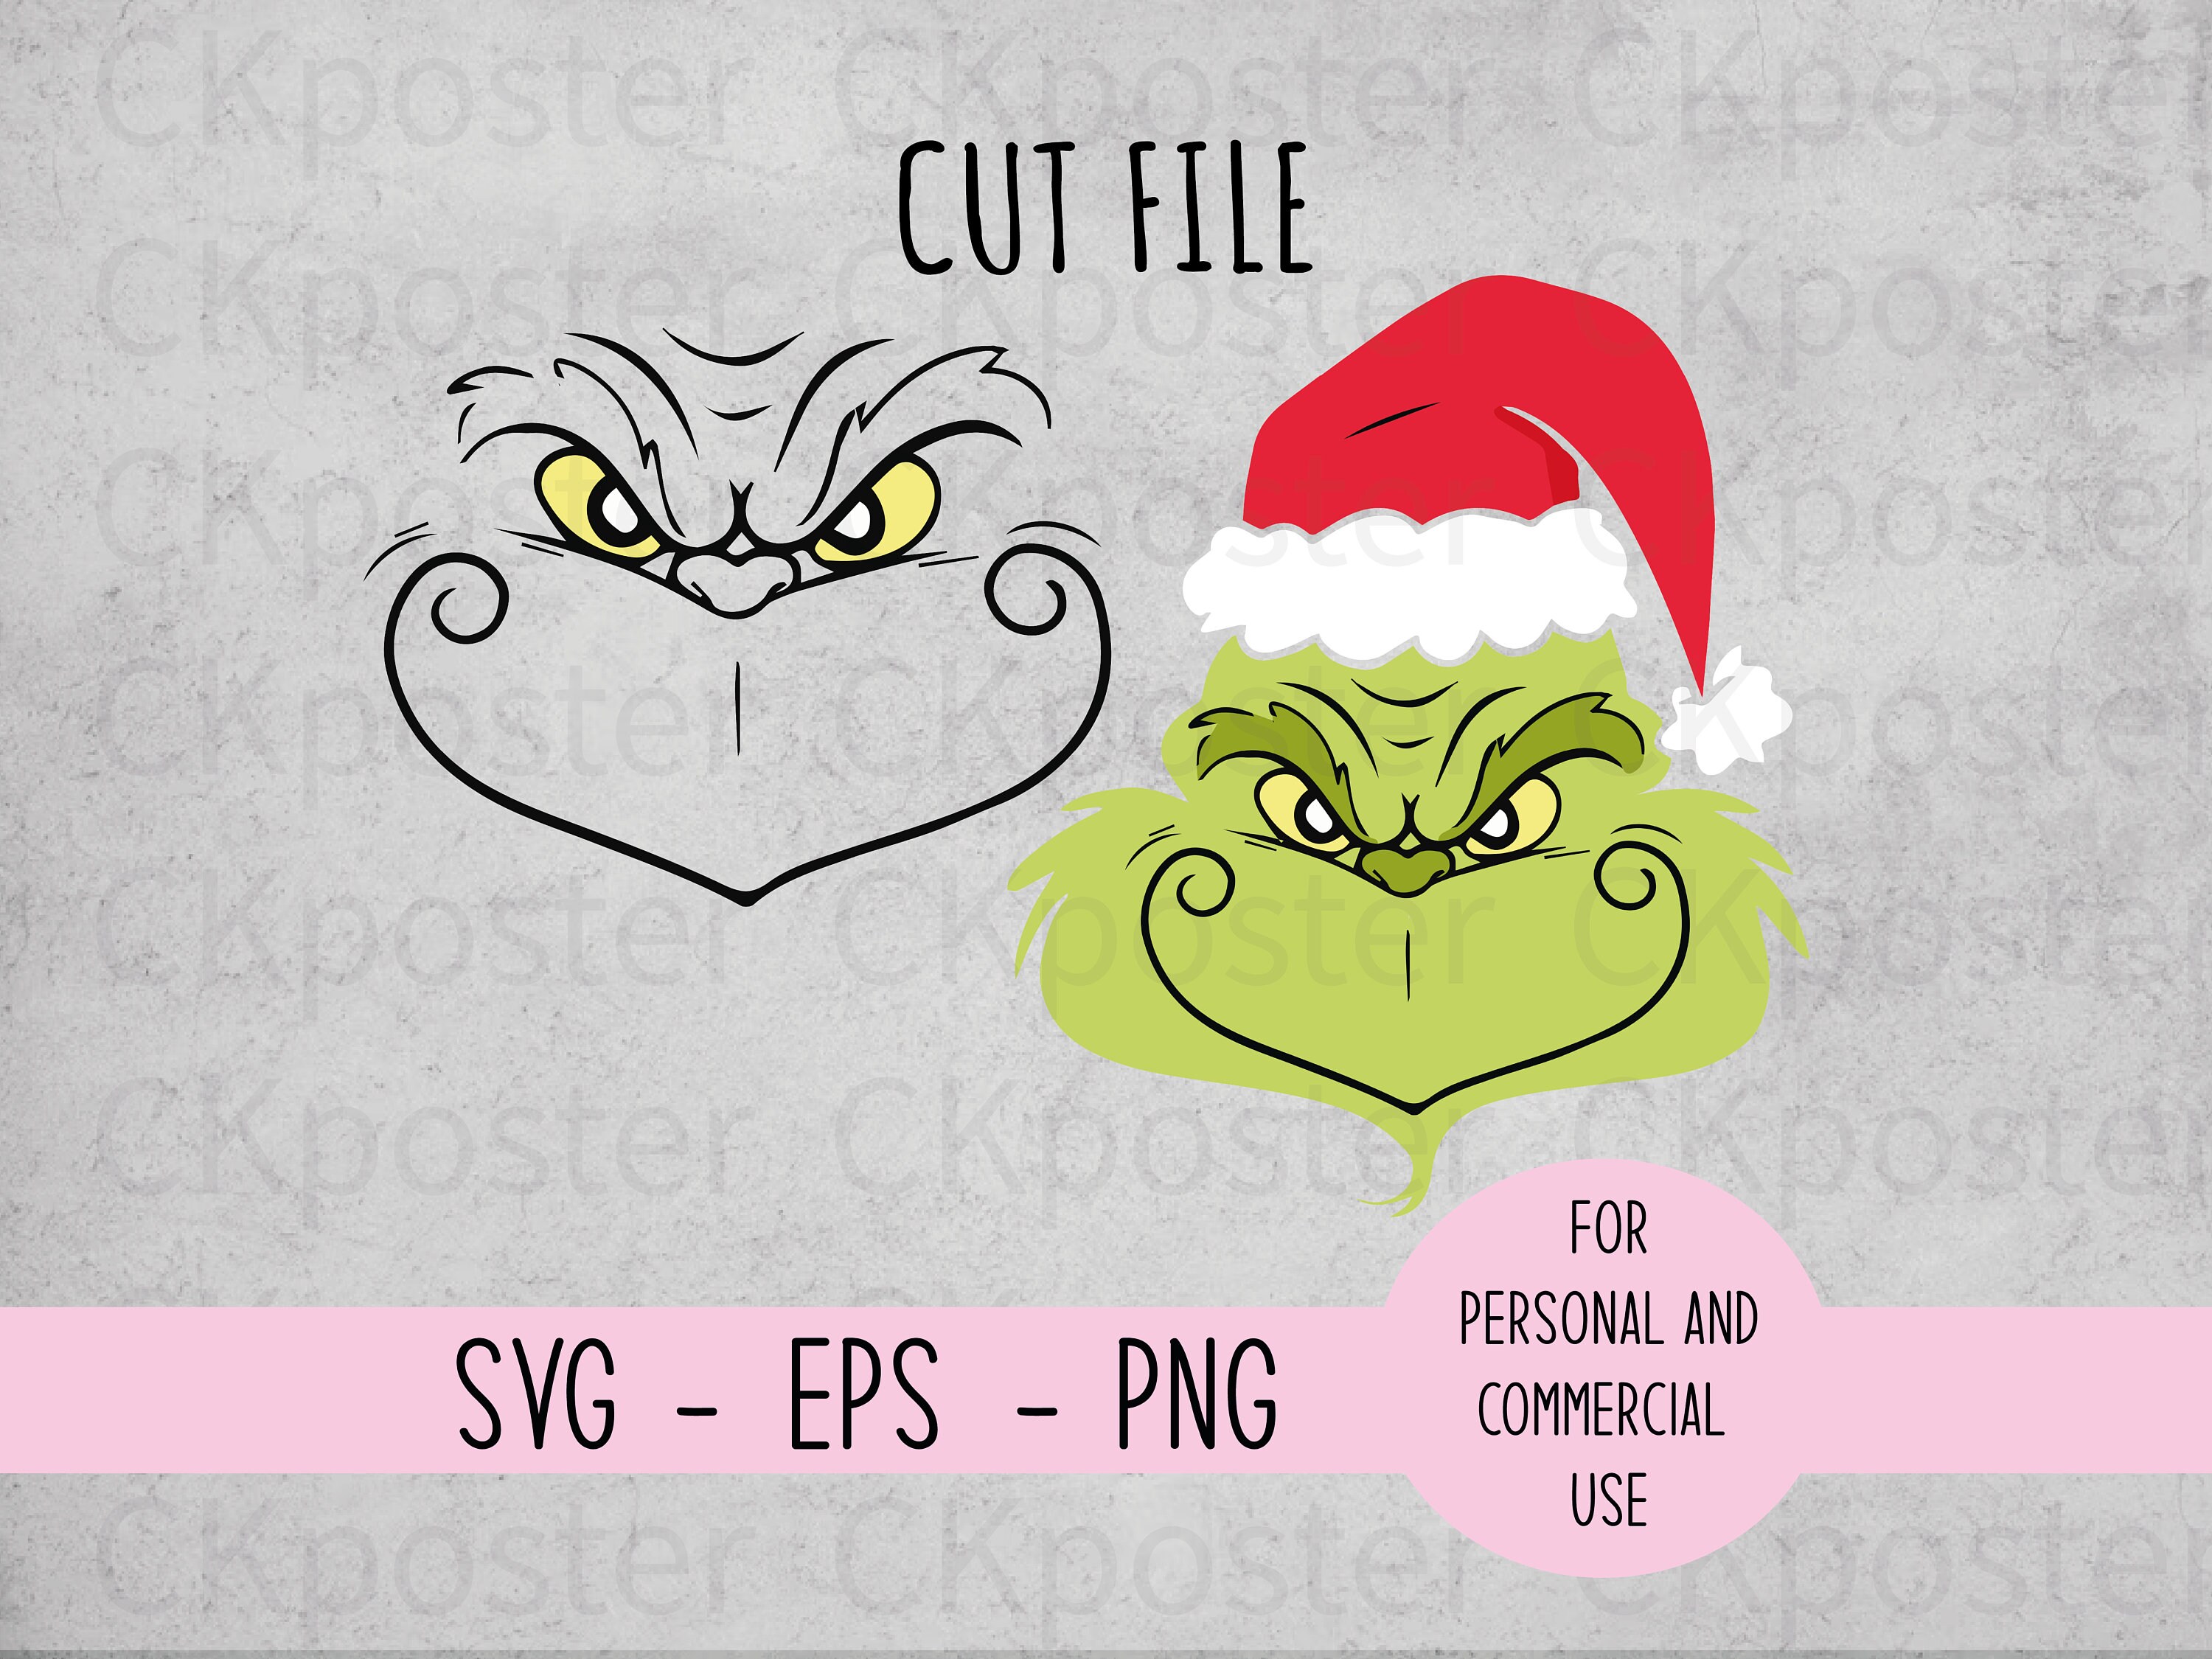 SVG Grinch SVG Christmas Grinch Png Cut File Cricut Grinch Face Silhouette  Design Christmas Character Grinch Smile Clipart 